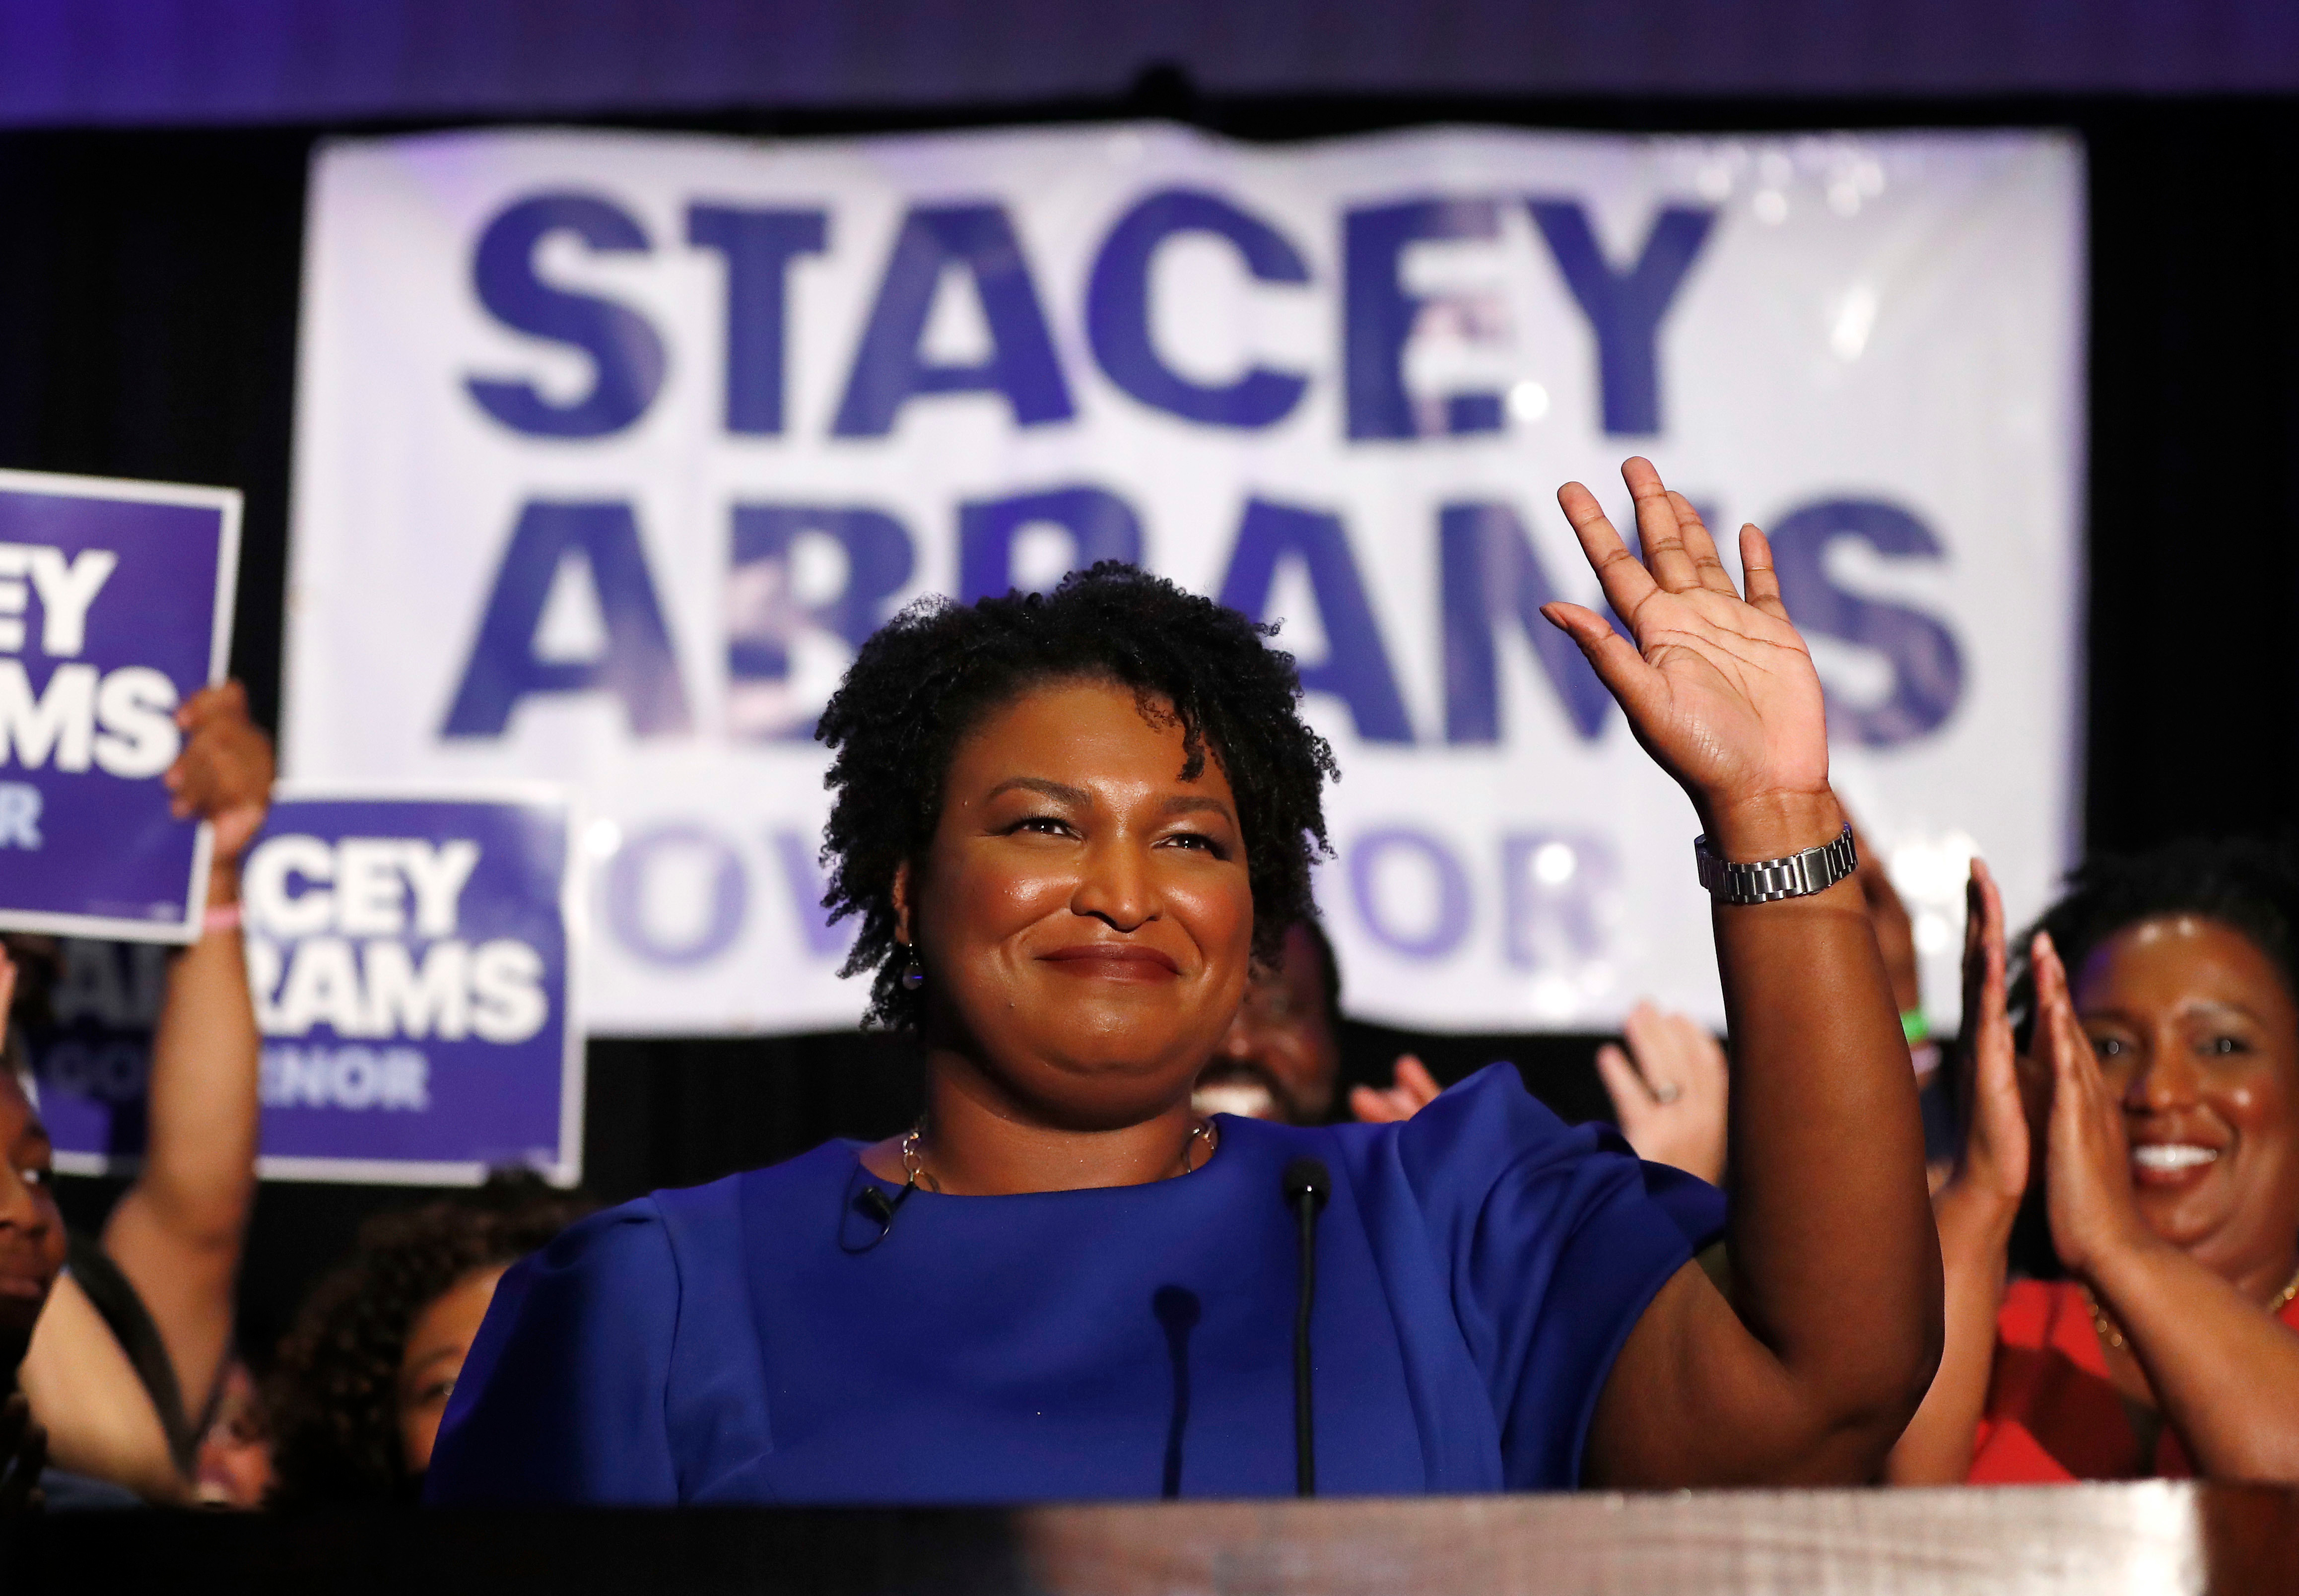 Stacey Abrams Has $228,000 of Debt. Here’s How the Georgia Governor Candidate Got it, and How She Is Paying It Back